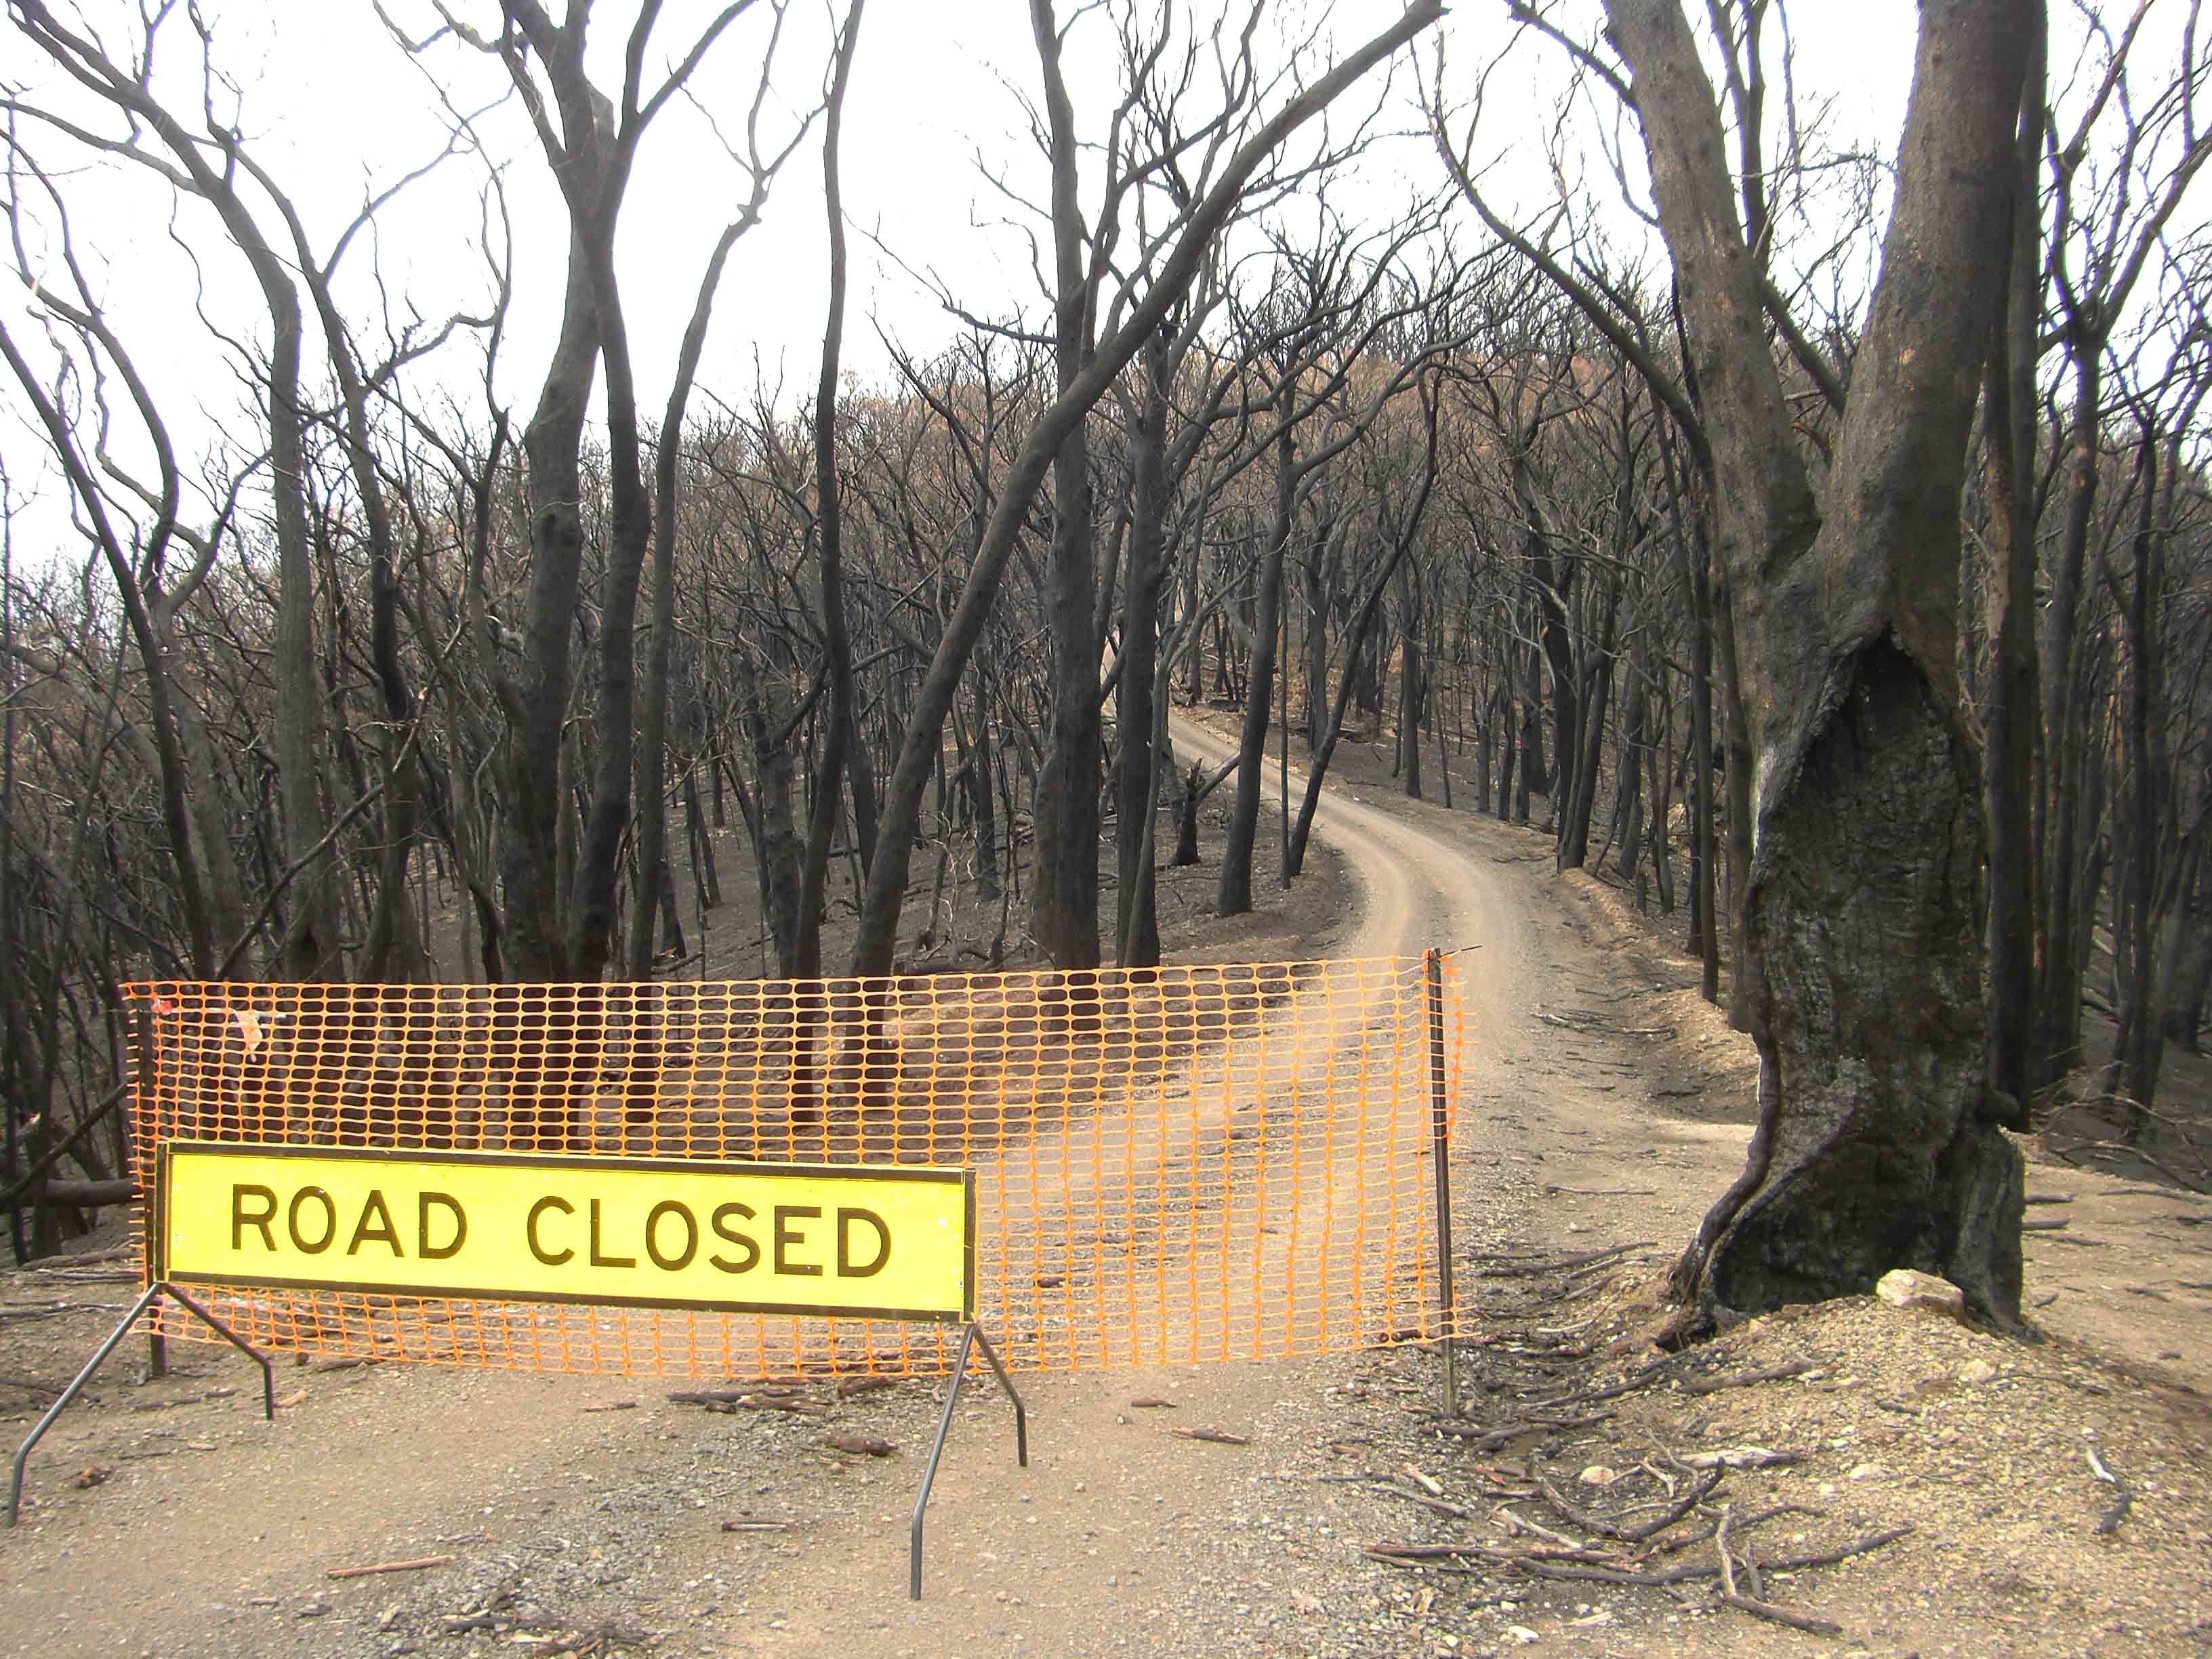 A gravel road winds up a hillside behind a 'road closed' sign. The hillside is covered with dead, blackened trees.